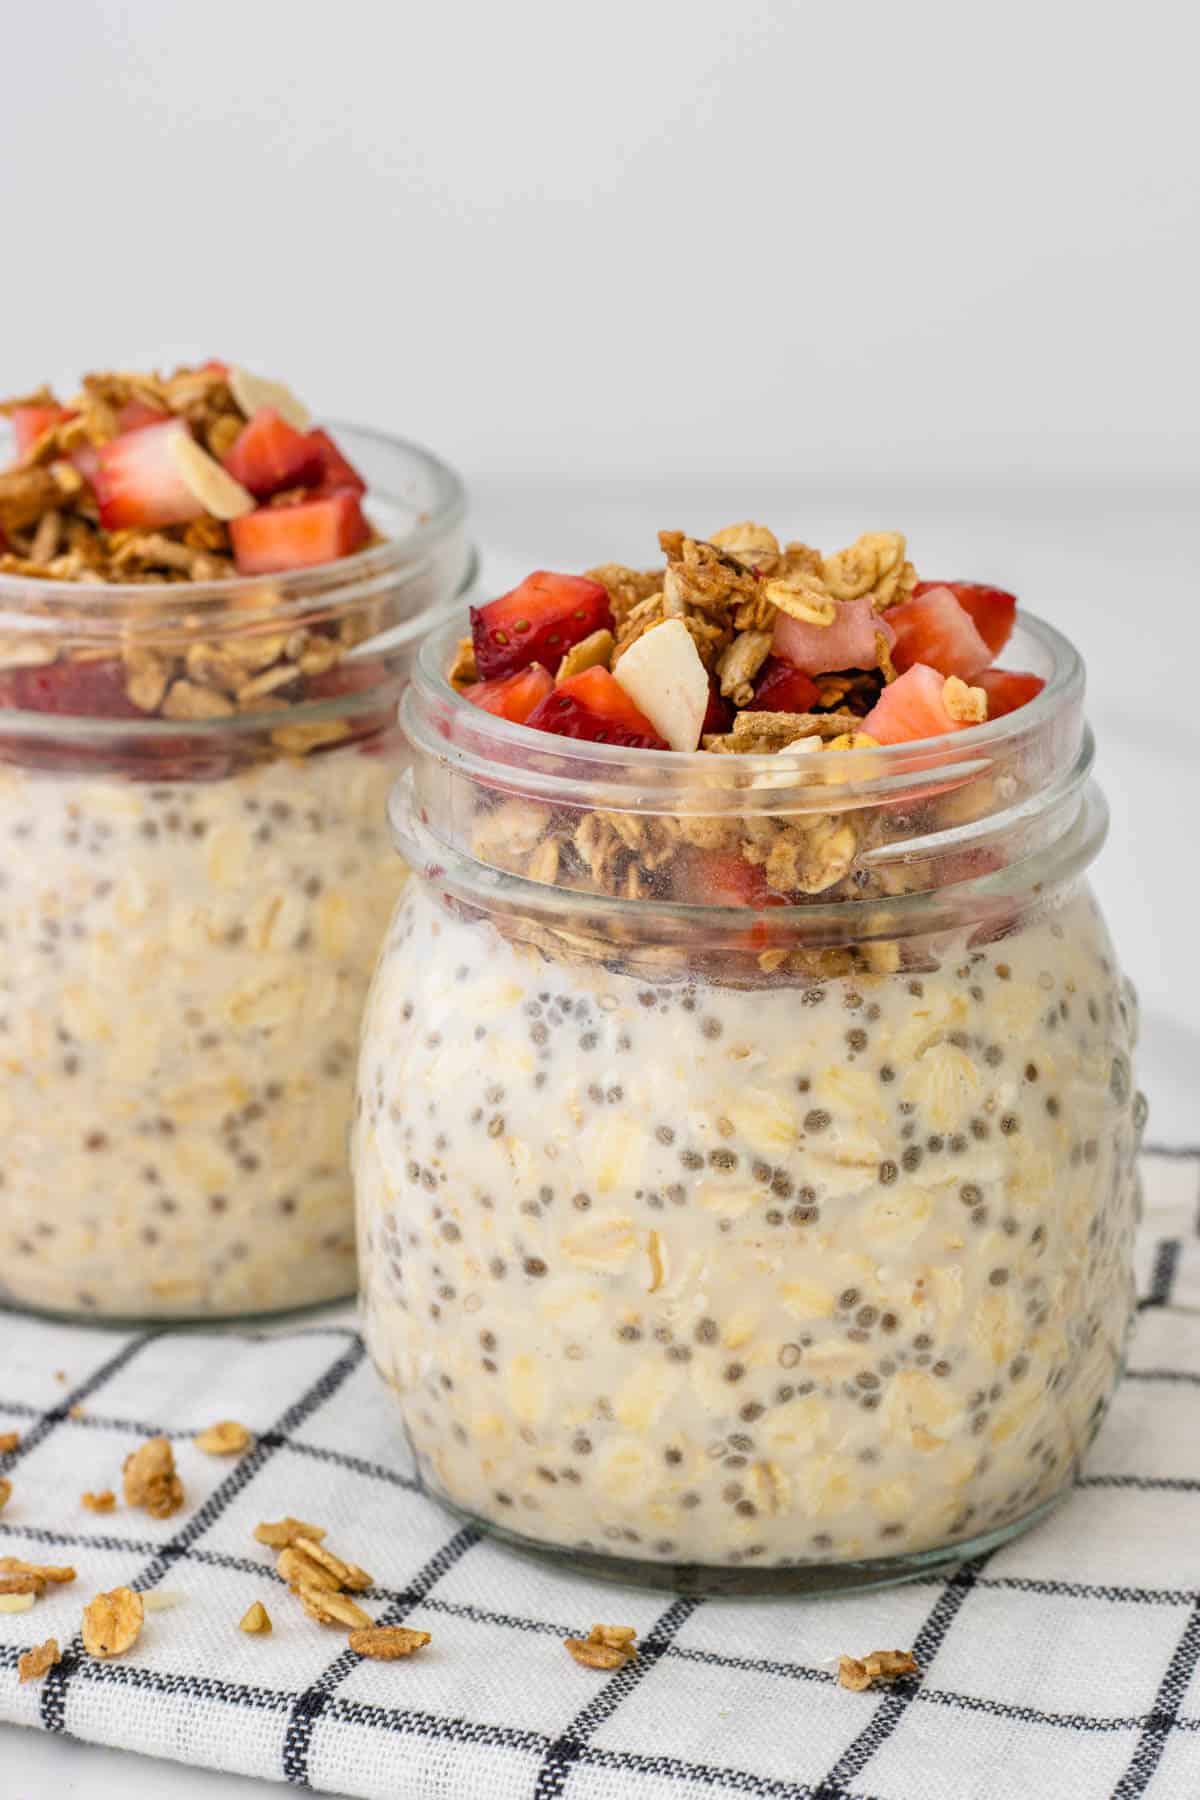 The Best Healthy Birthday Cake Overnight Oats - The June Table